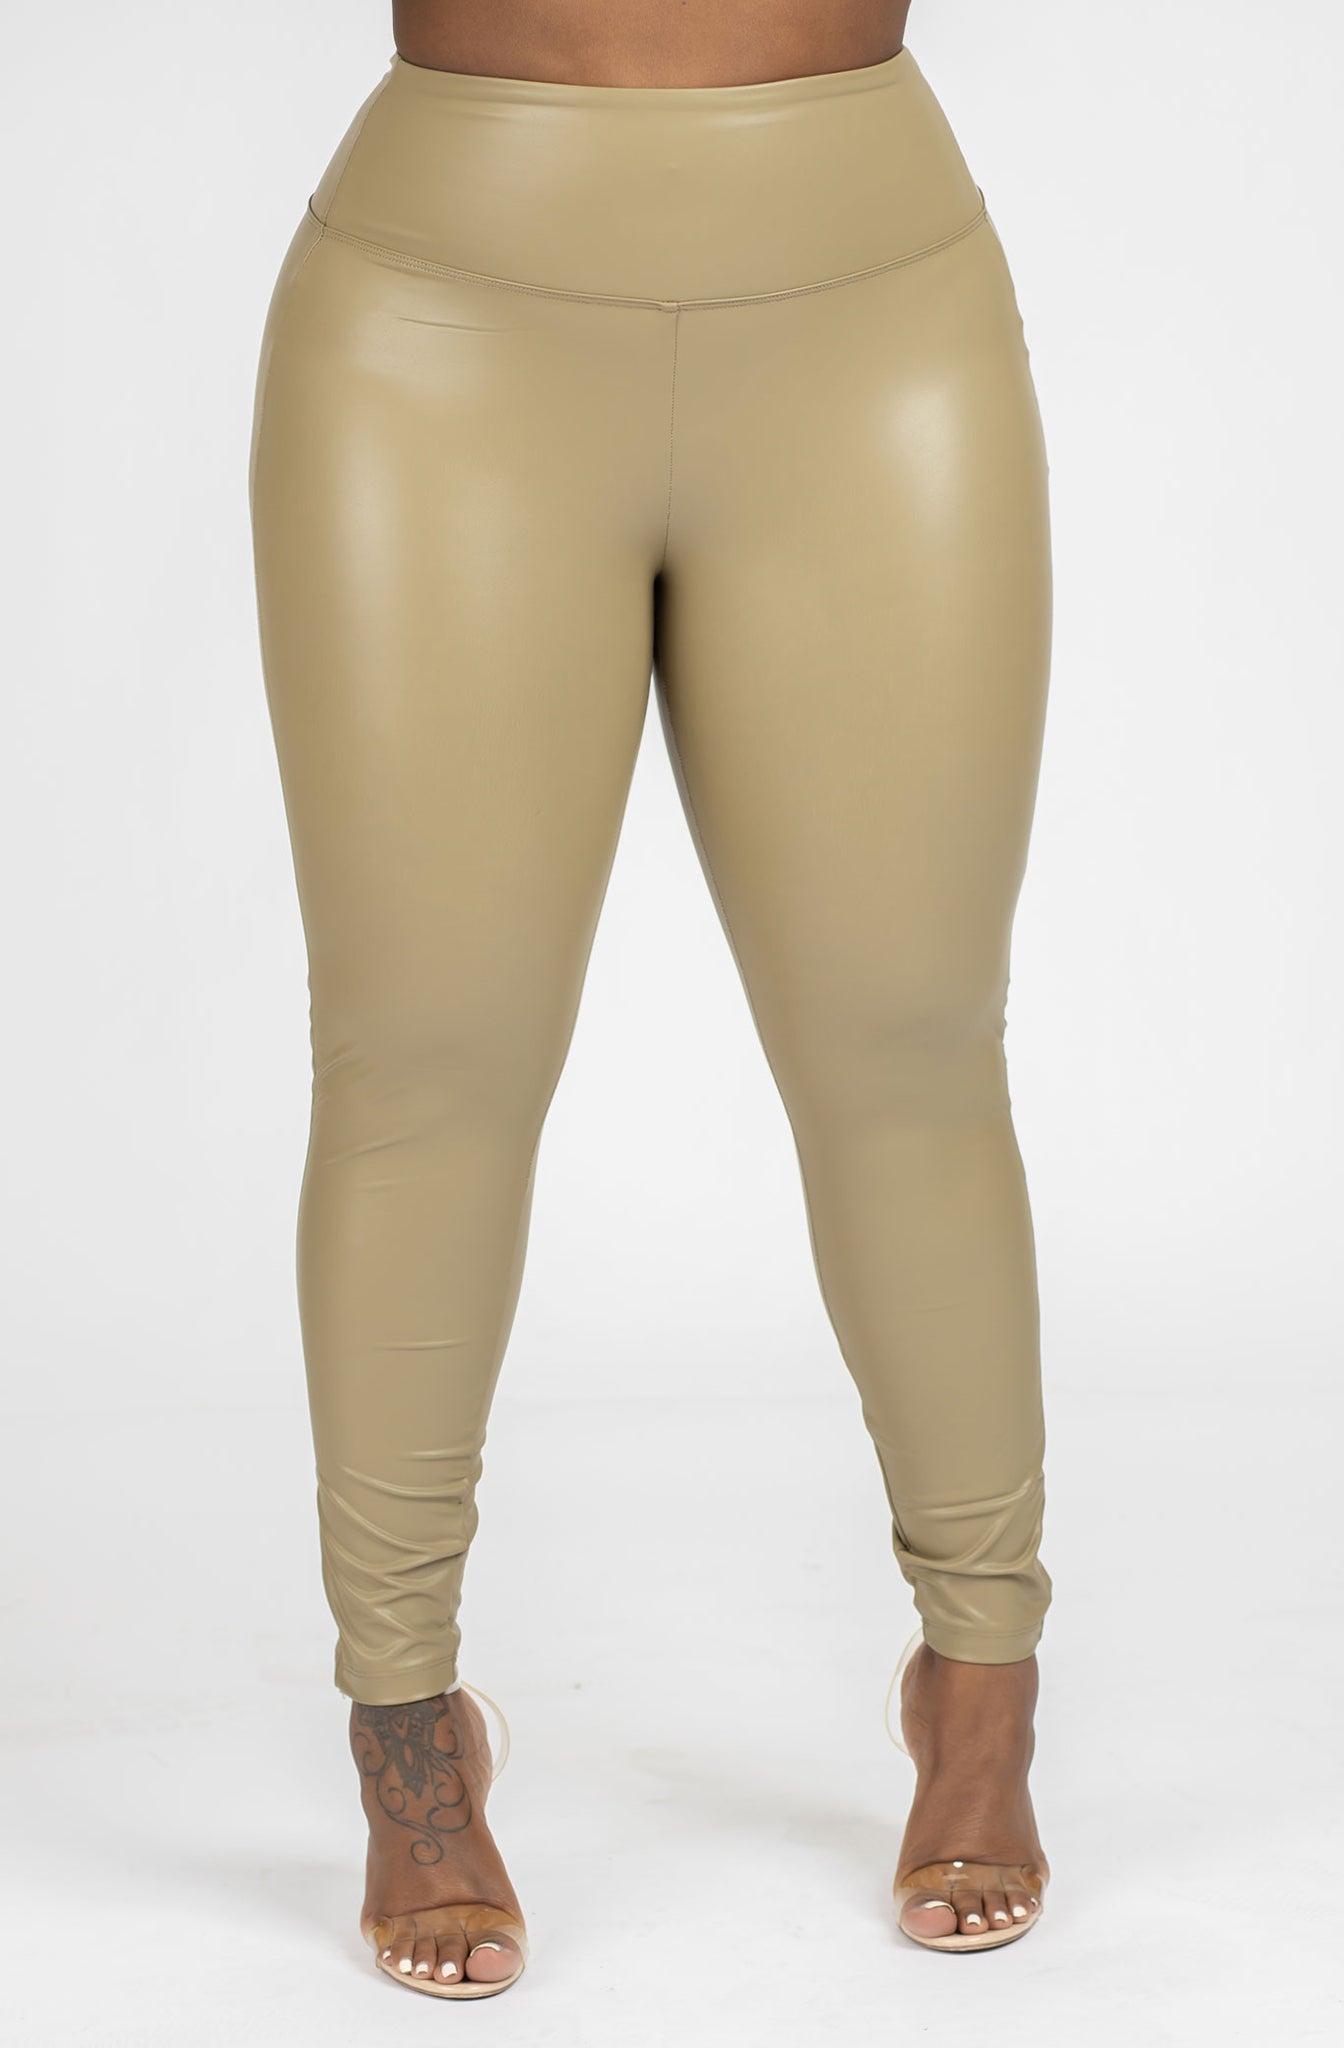 Coco Leather Basic Leggings – thealabeled